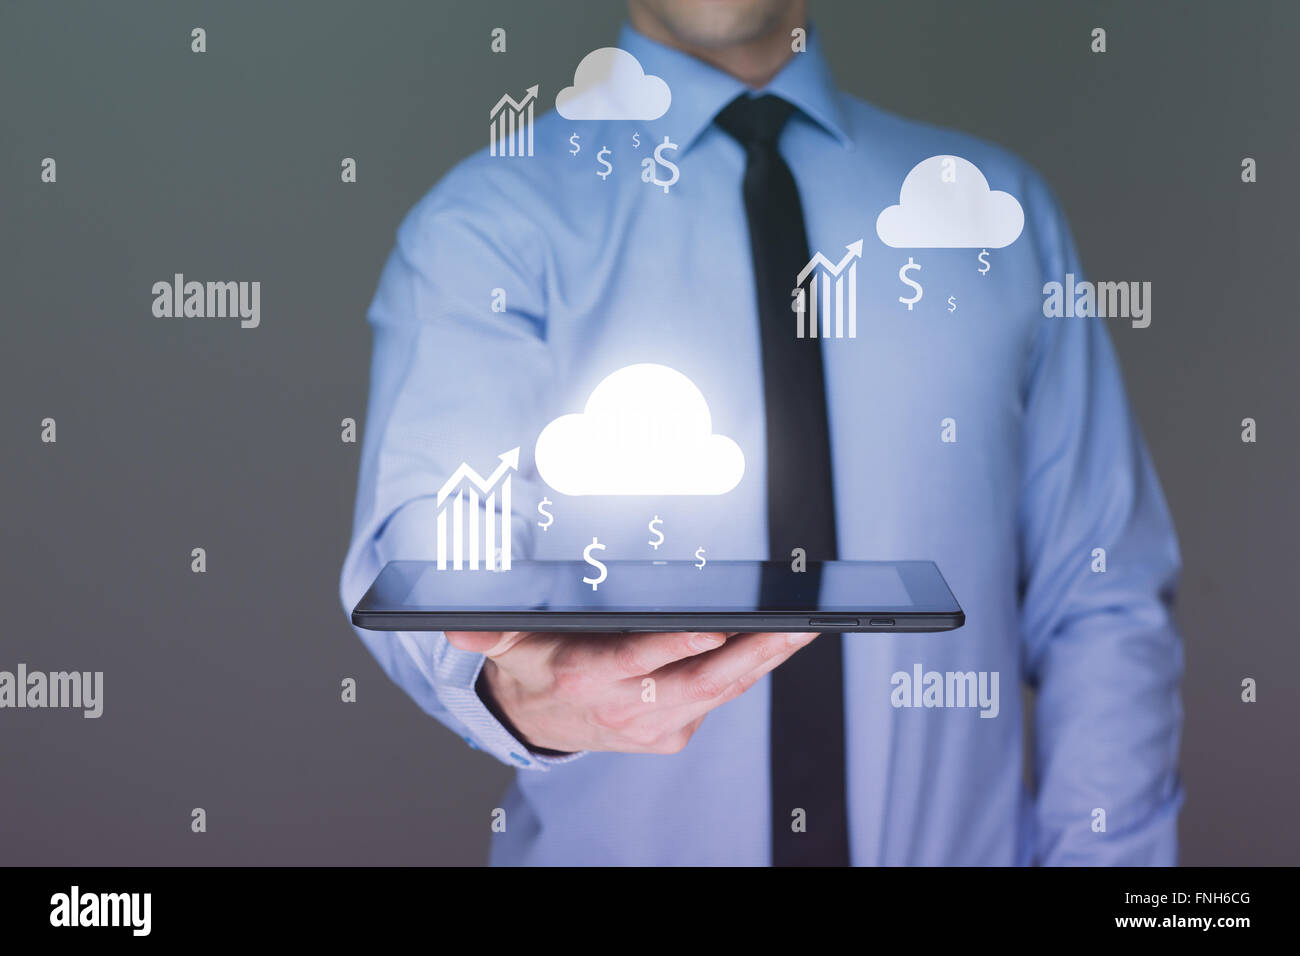 Business man using tablet PC with social media icon set Stock Photo